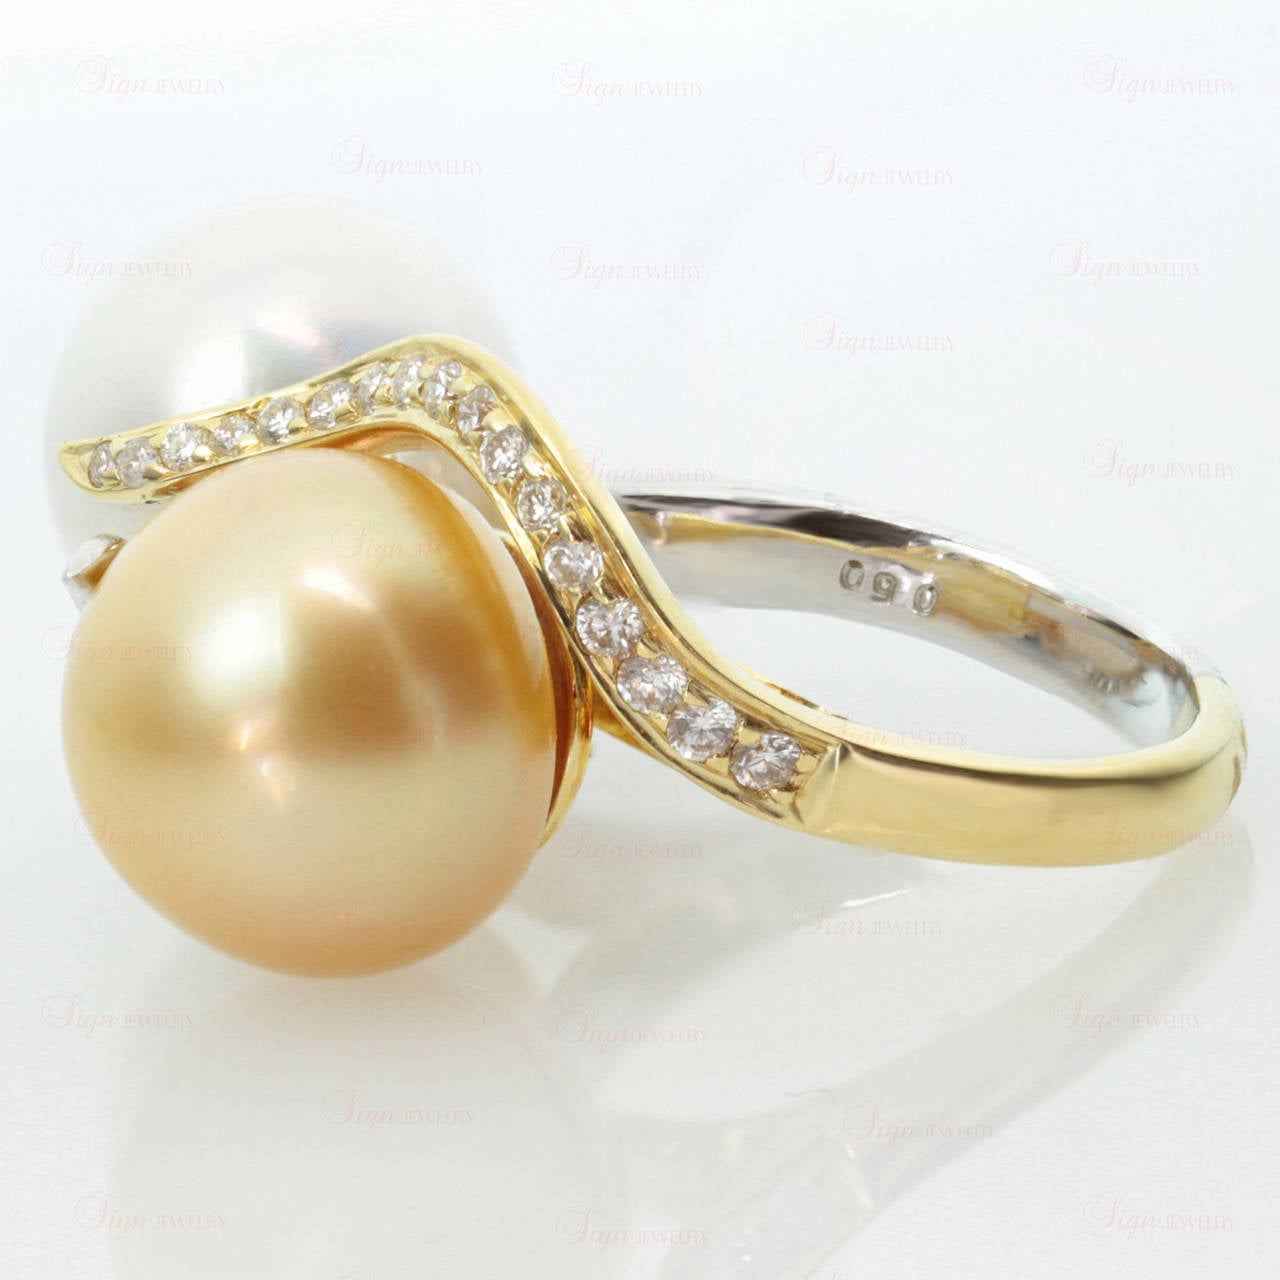 This modern woman's ring features an elegant design of dual unity expressed in the two tones of 18k yellow & white gold and a pair of natural 13.0mm South Sea cultured pearls - a vivid fancy yellow pearl and a pure white pearl. Both pearls are